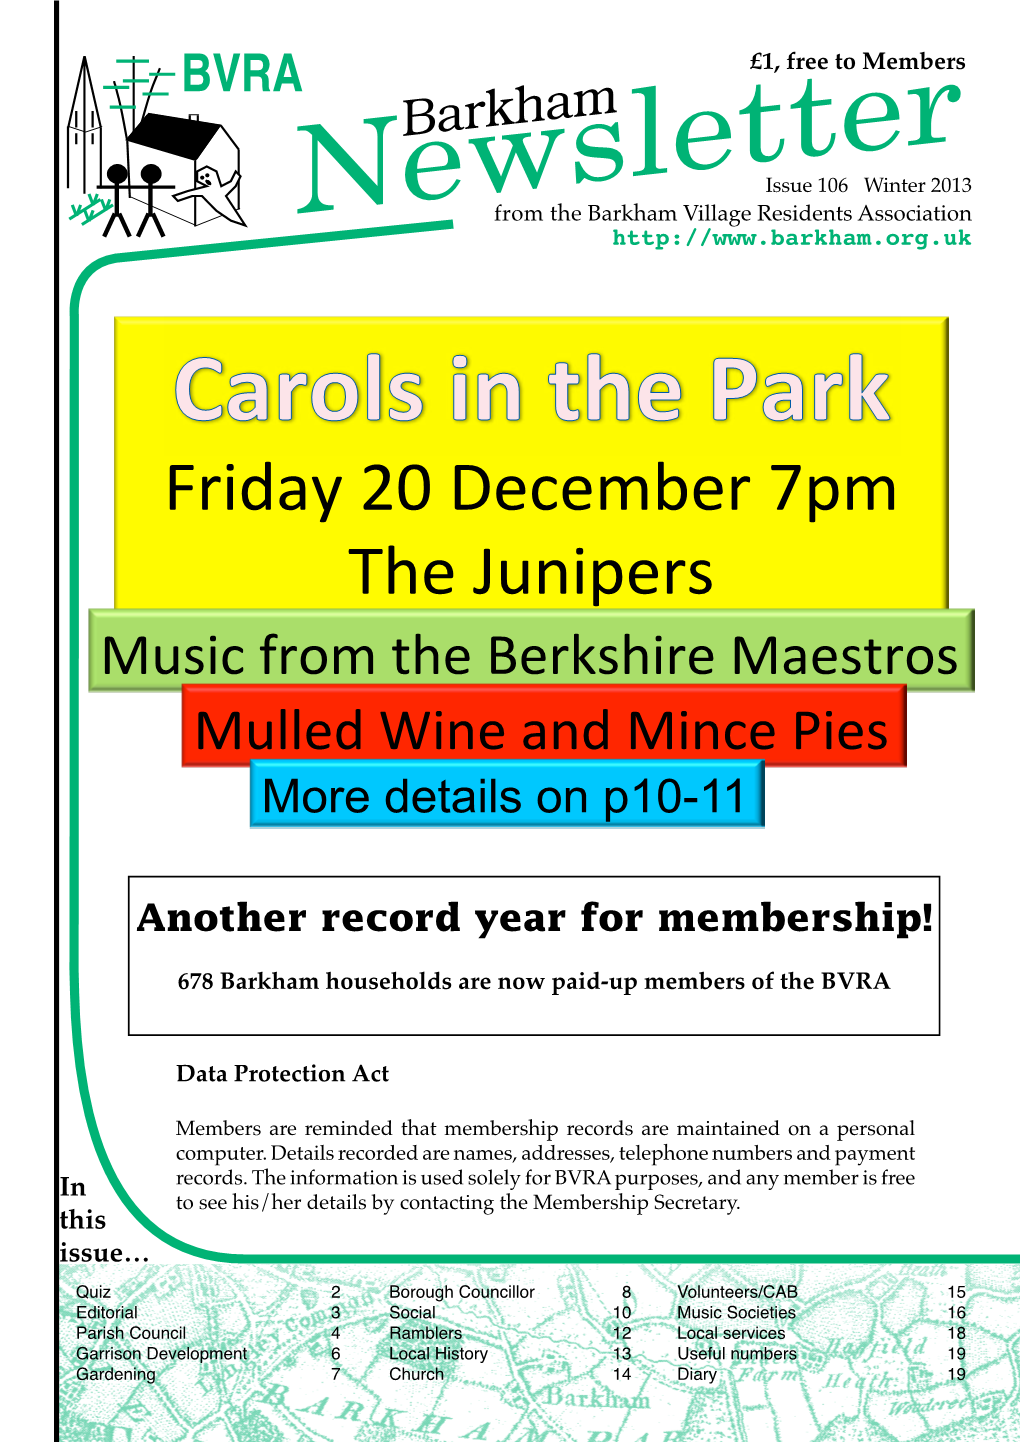 Friday 20 December 7Pm the Junipers Music from the Berkshire Maestros Mulled Wine and Mince Pies More Details on P10-11